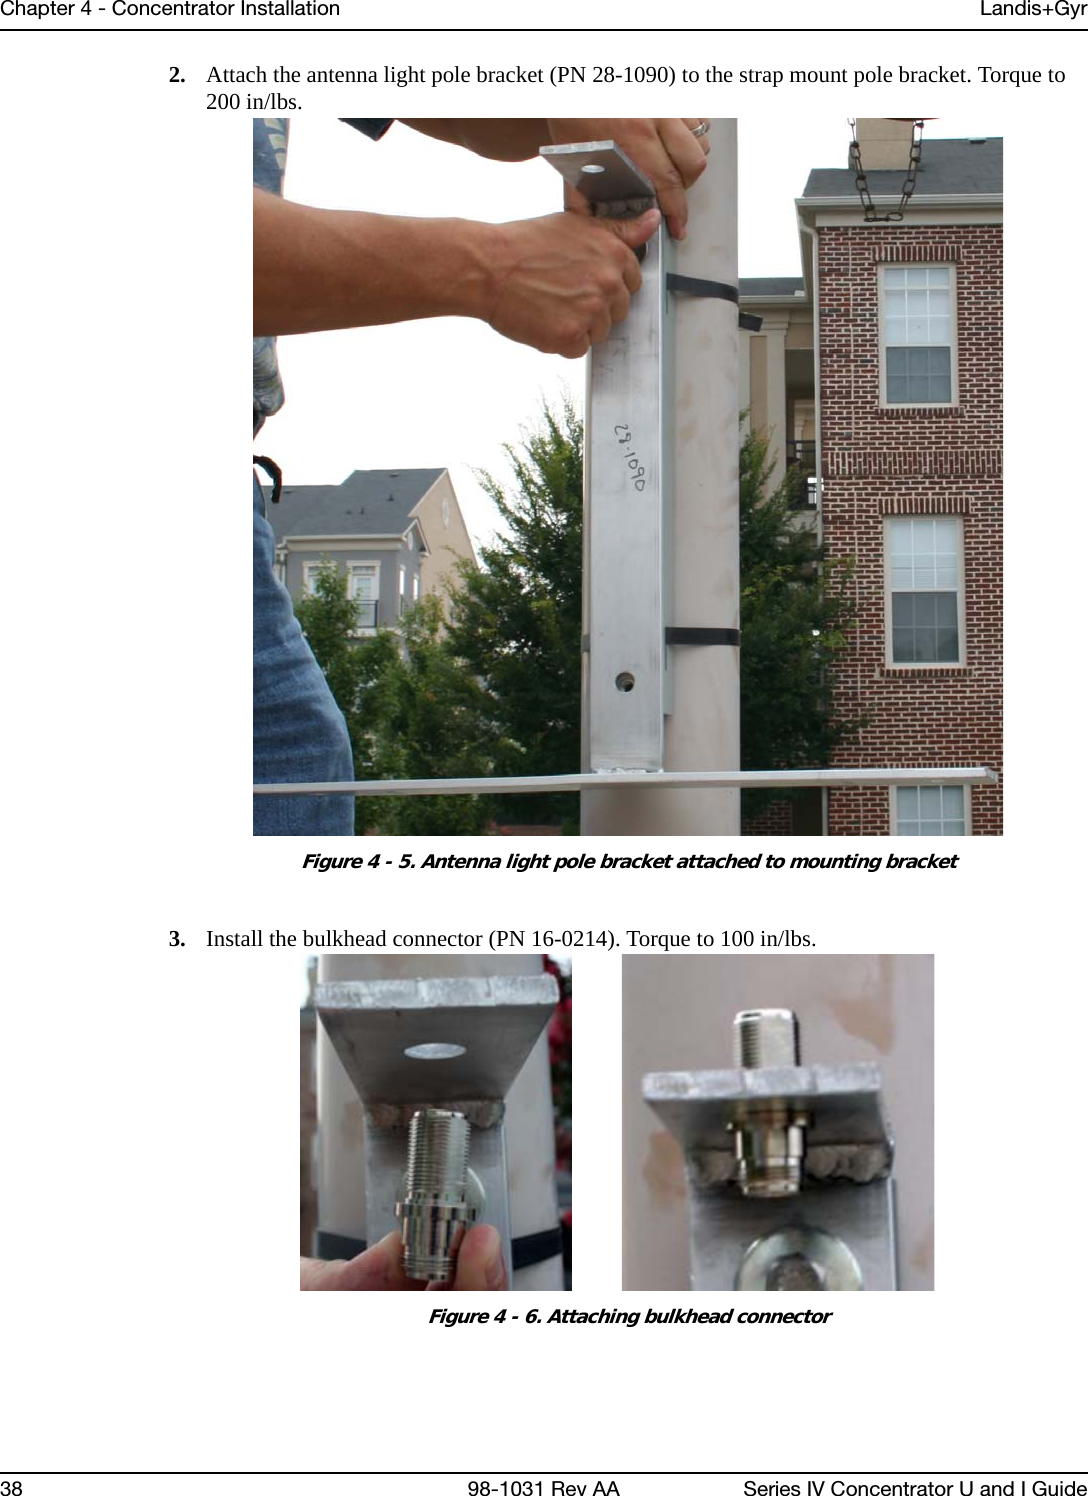 Chapter 4 - Concentrator Installation Landis+Gyr38 98-1031 Rev AA Series IV Concentrator U and I Guide2. Attach the antenna light pole bracket (PN 28-1090) to the strap mount pole bracket. Torque to 200 in/lbs.Figure 4 - 5. Antenna light pole bracket attached to mounting bracket3. Install the bulkhead connector (PN 16-0214). Torque to 100 in/lbs.Figure 4 - 6. Attaching bulkhead connector